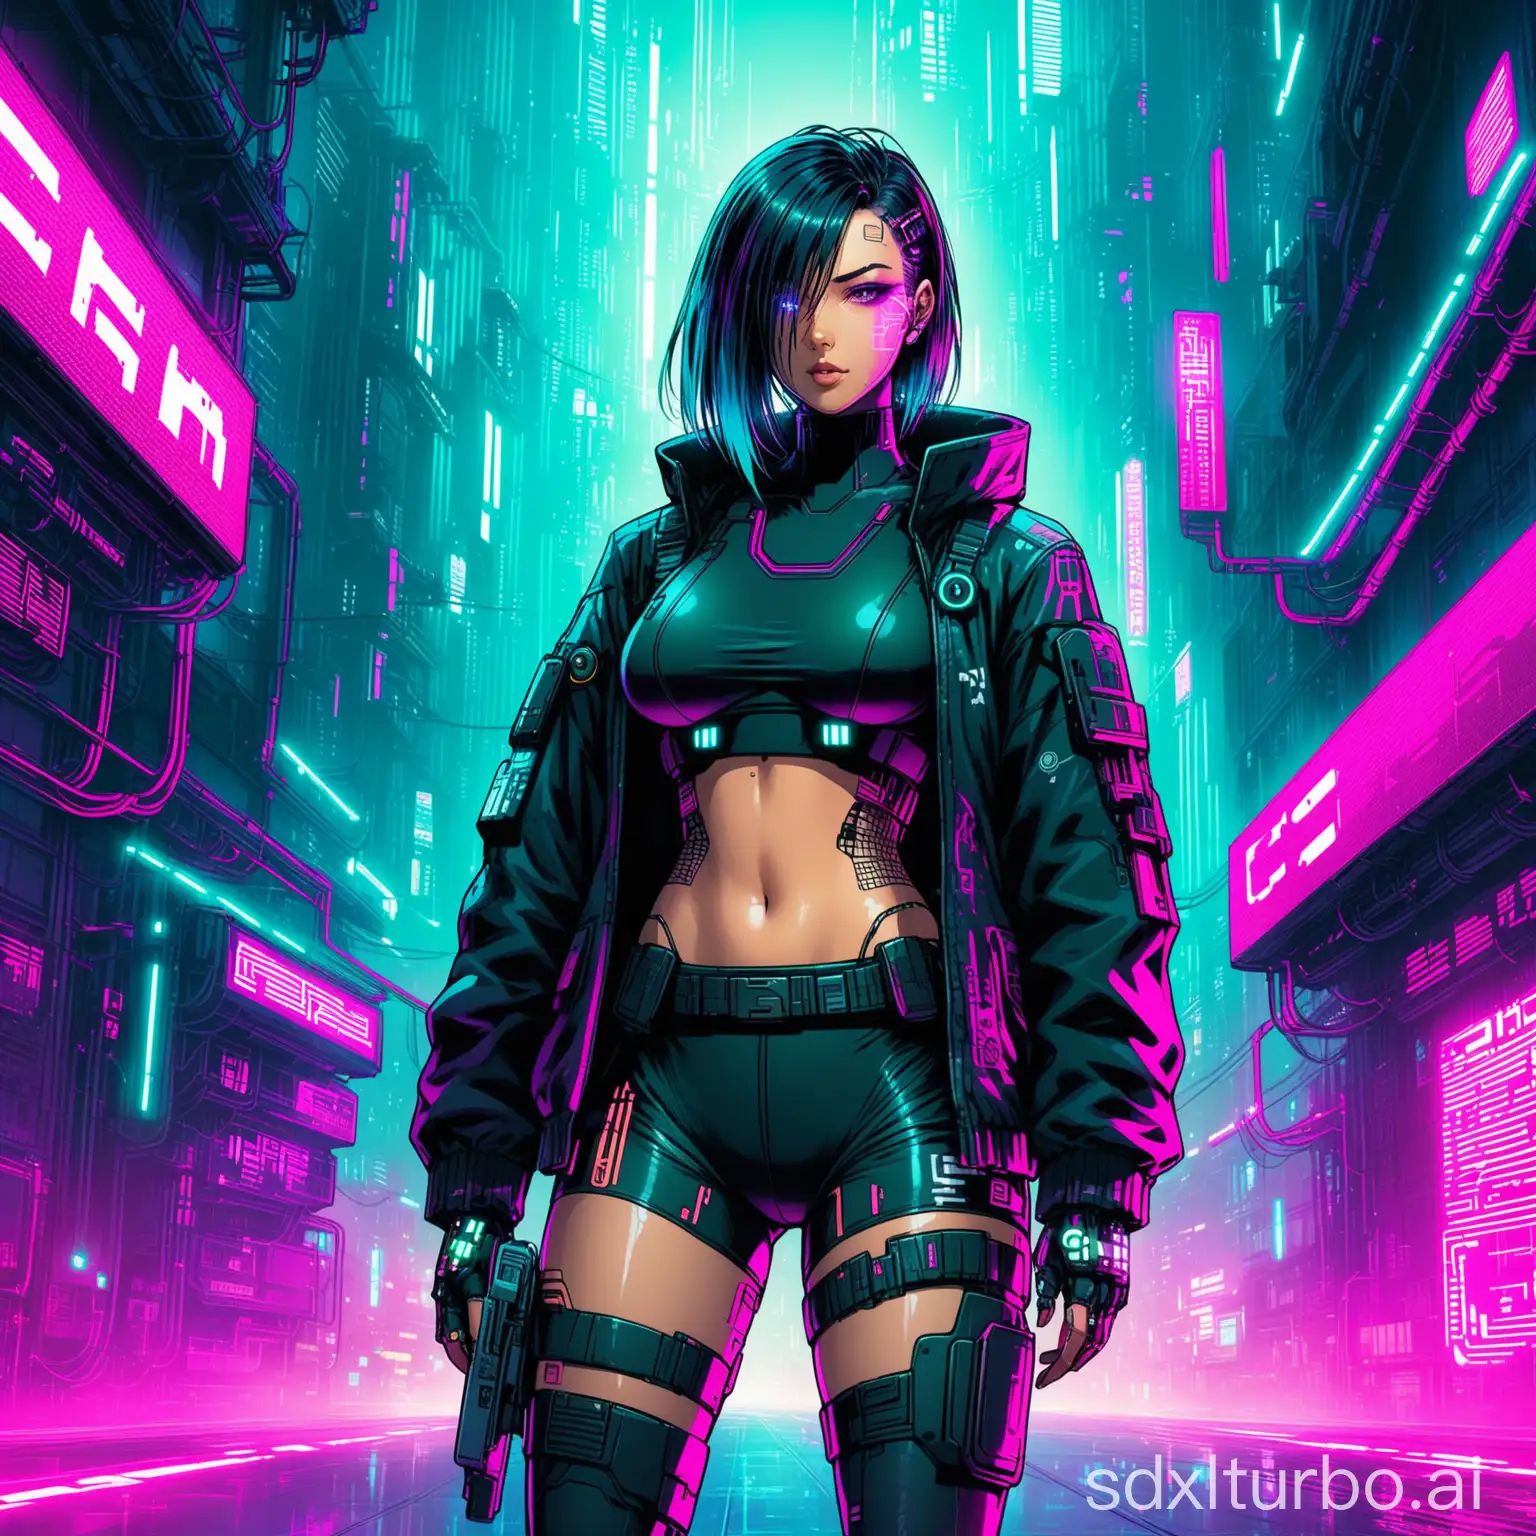 Futuristic-Cyberpunk-Cityscape-with-Neon-Lights-and-Flying-Vehicles